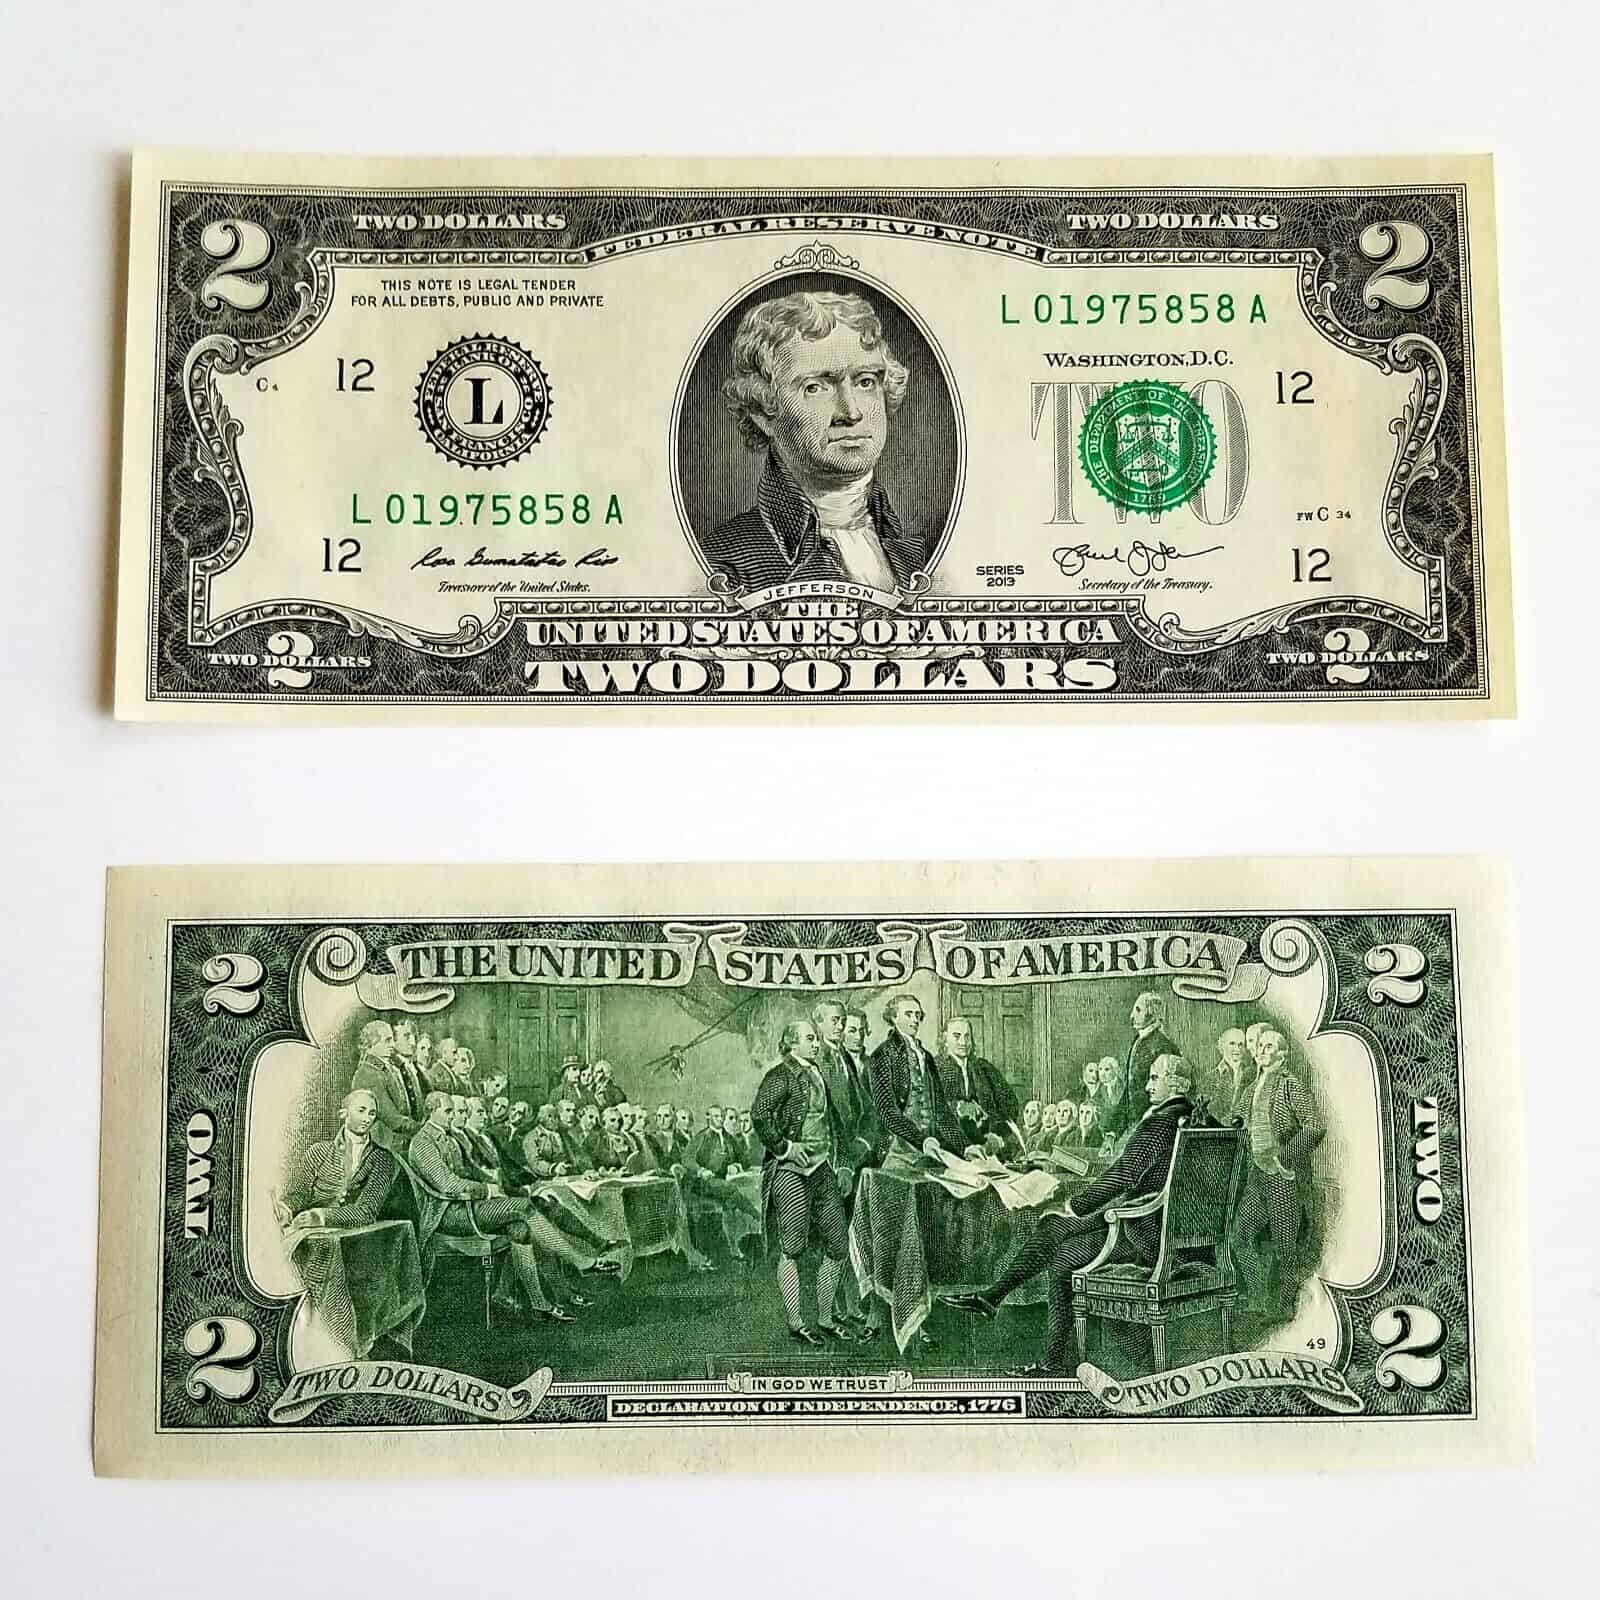 The History of the $2 Bill